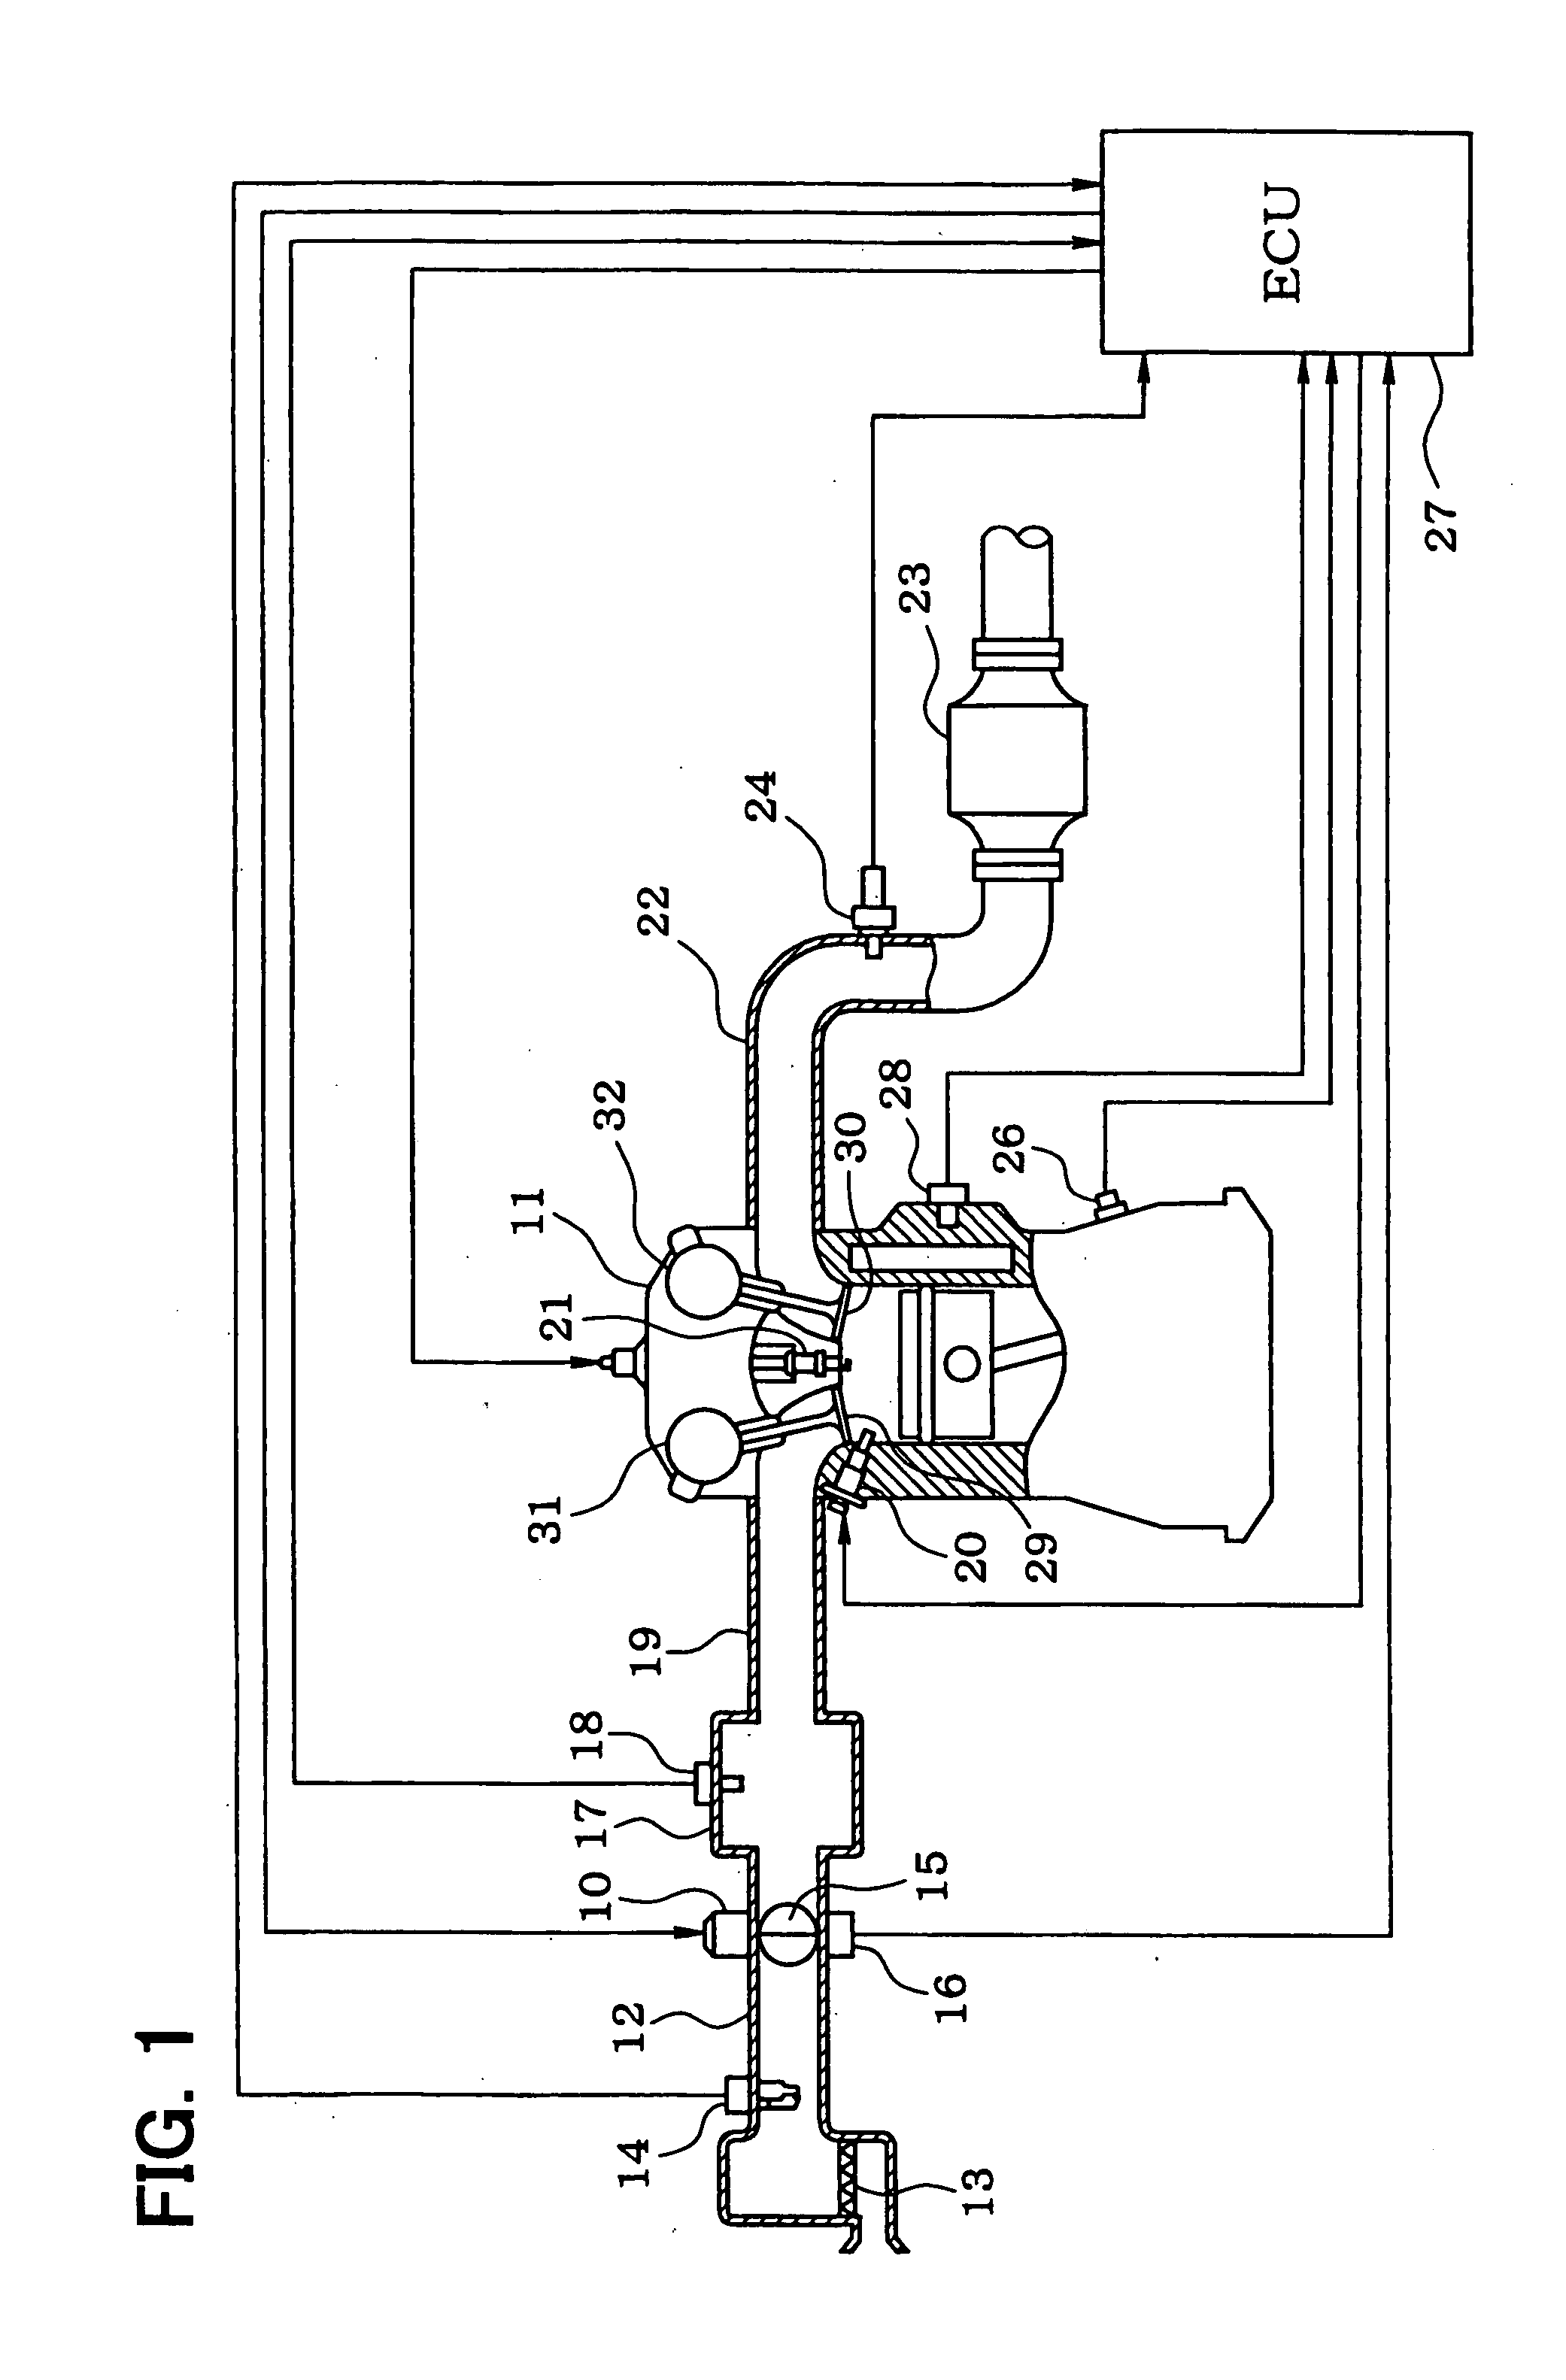 Knock determining device and method for internal combustion engine